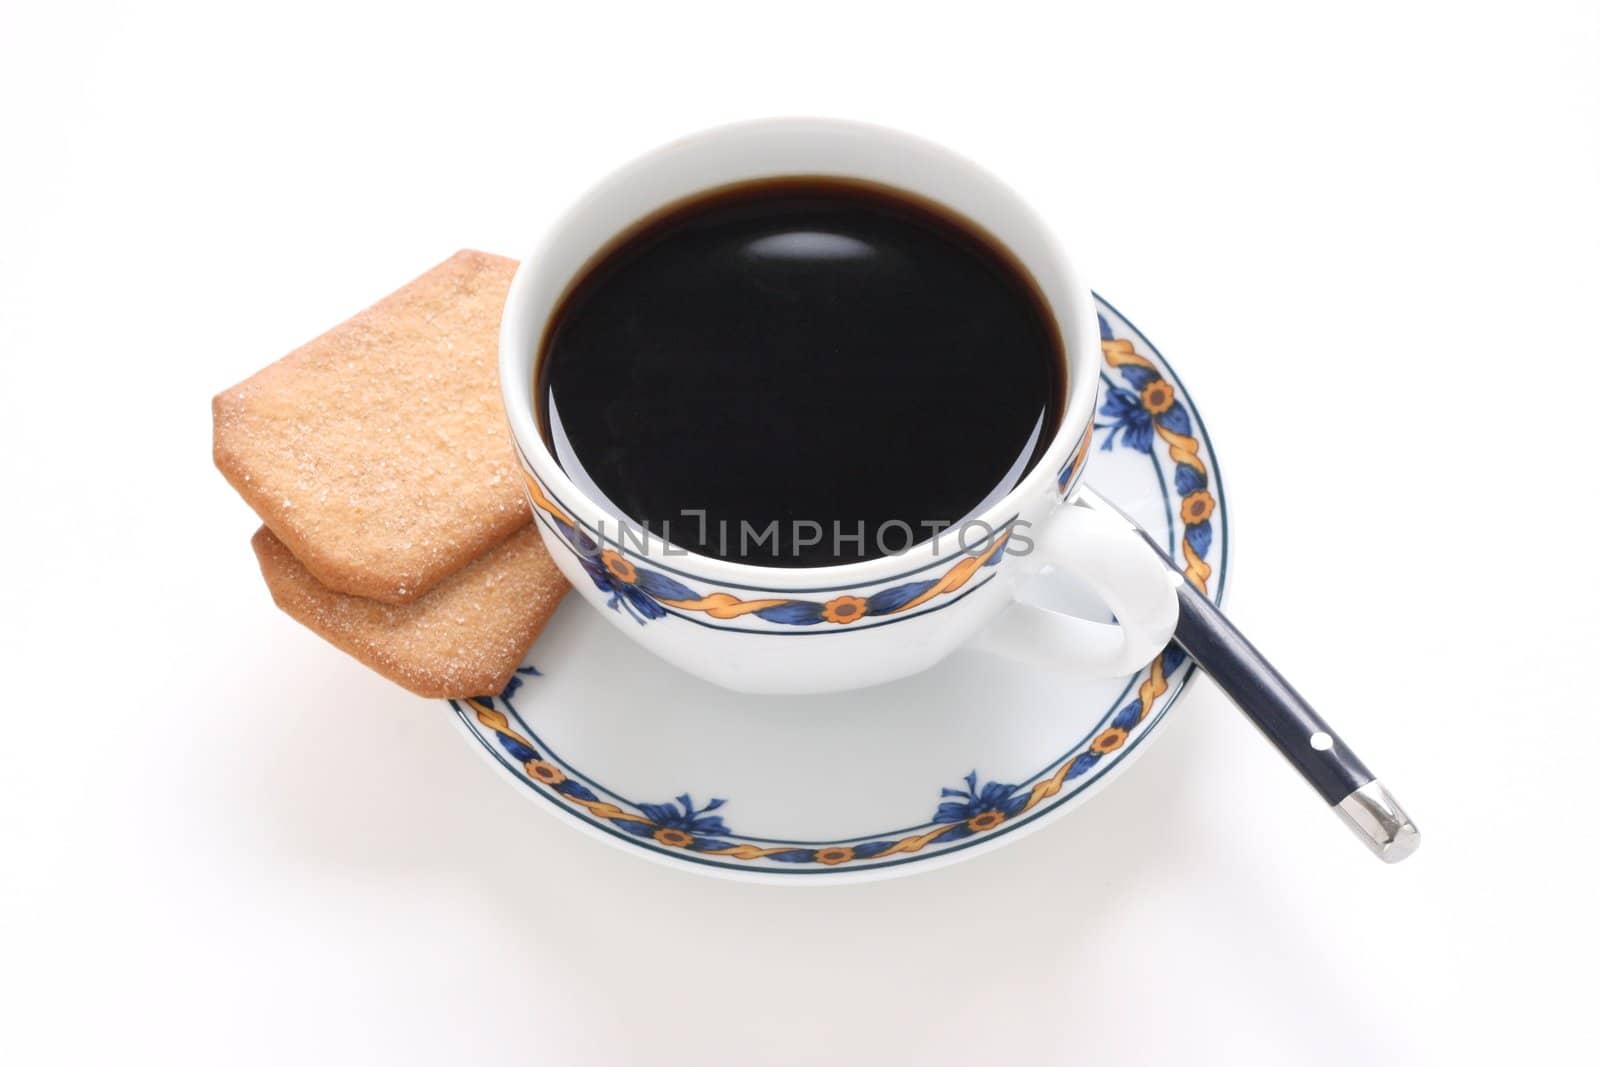 A cup of coffee with cookies